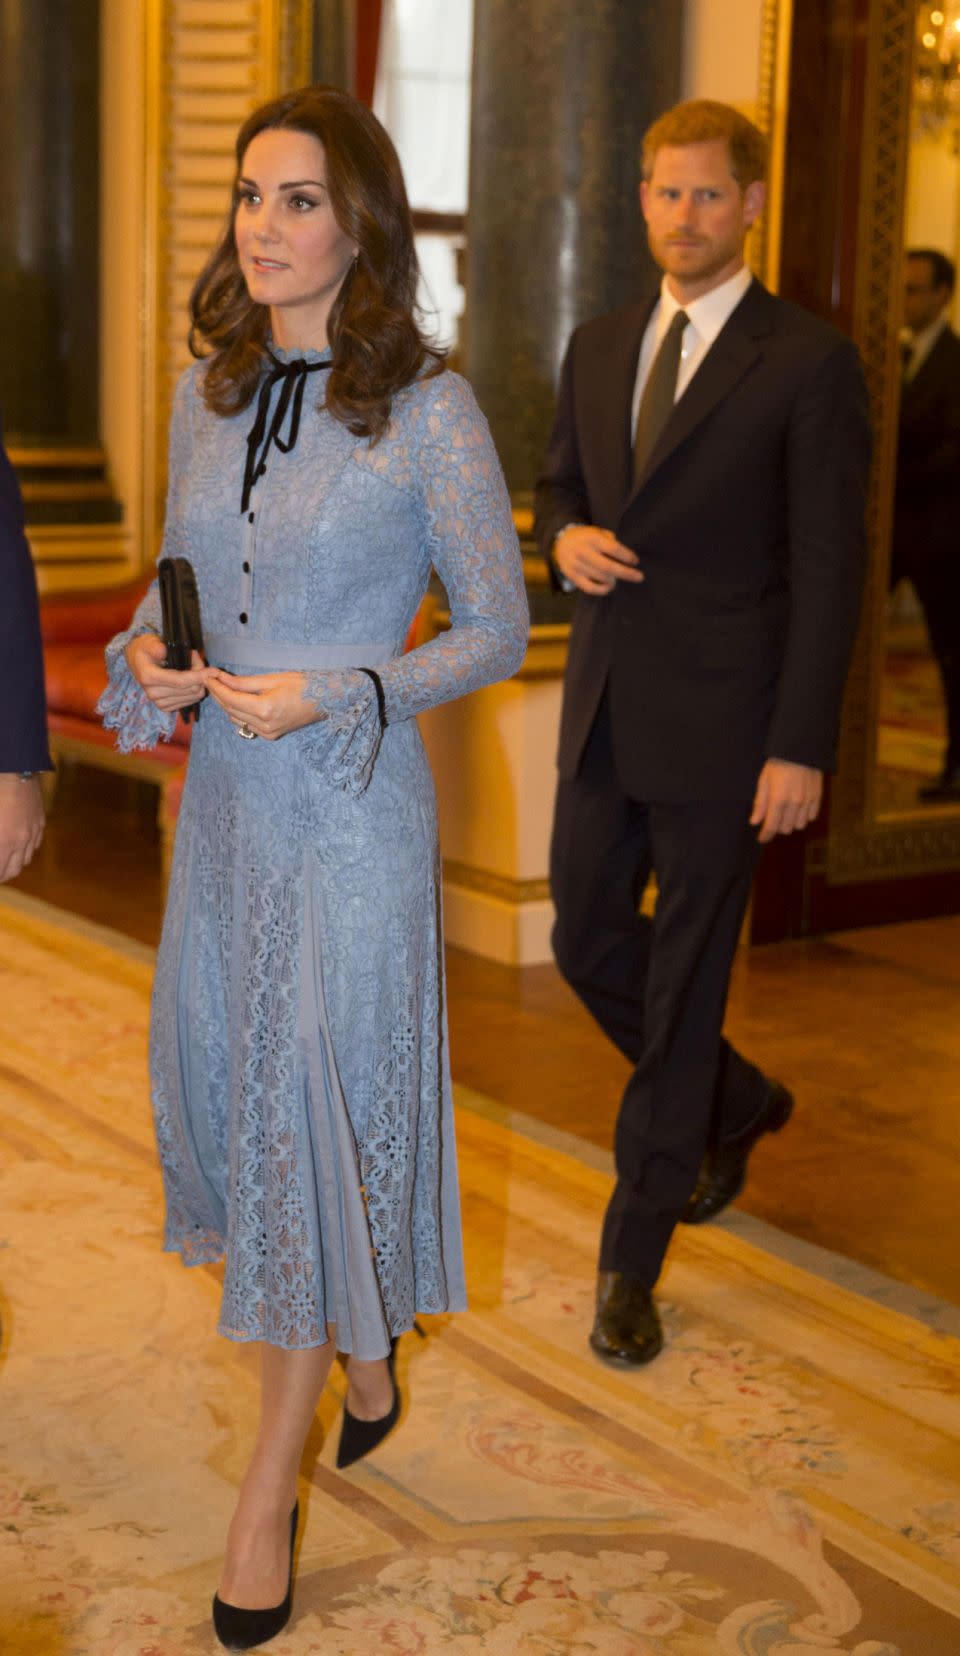 The Duchess stepped out this week for the first time since announcing she's pregnant with her first child. Photo: Getty Images